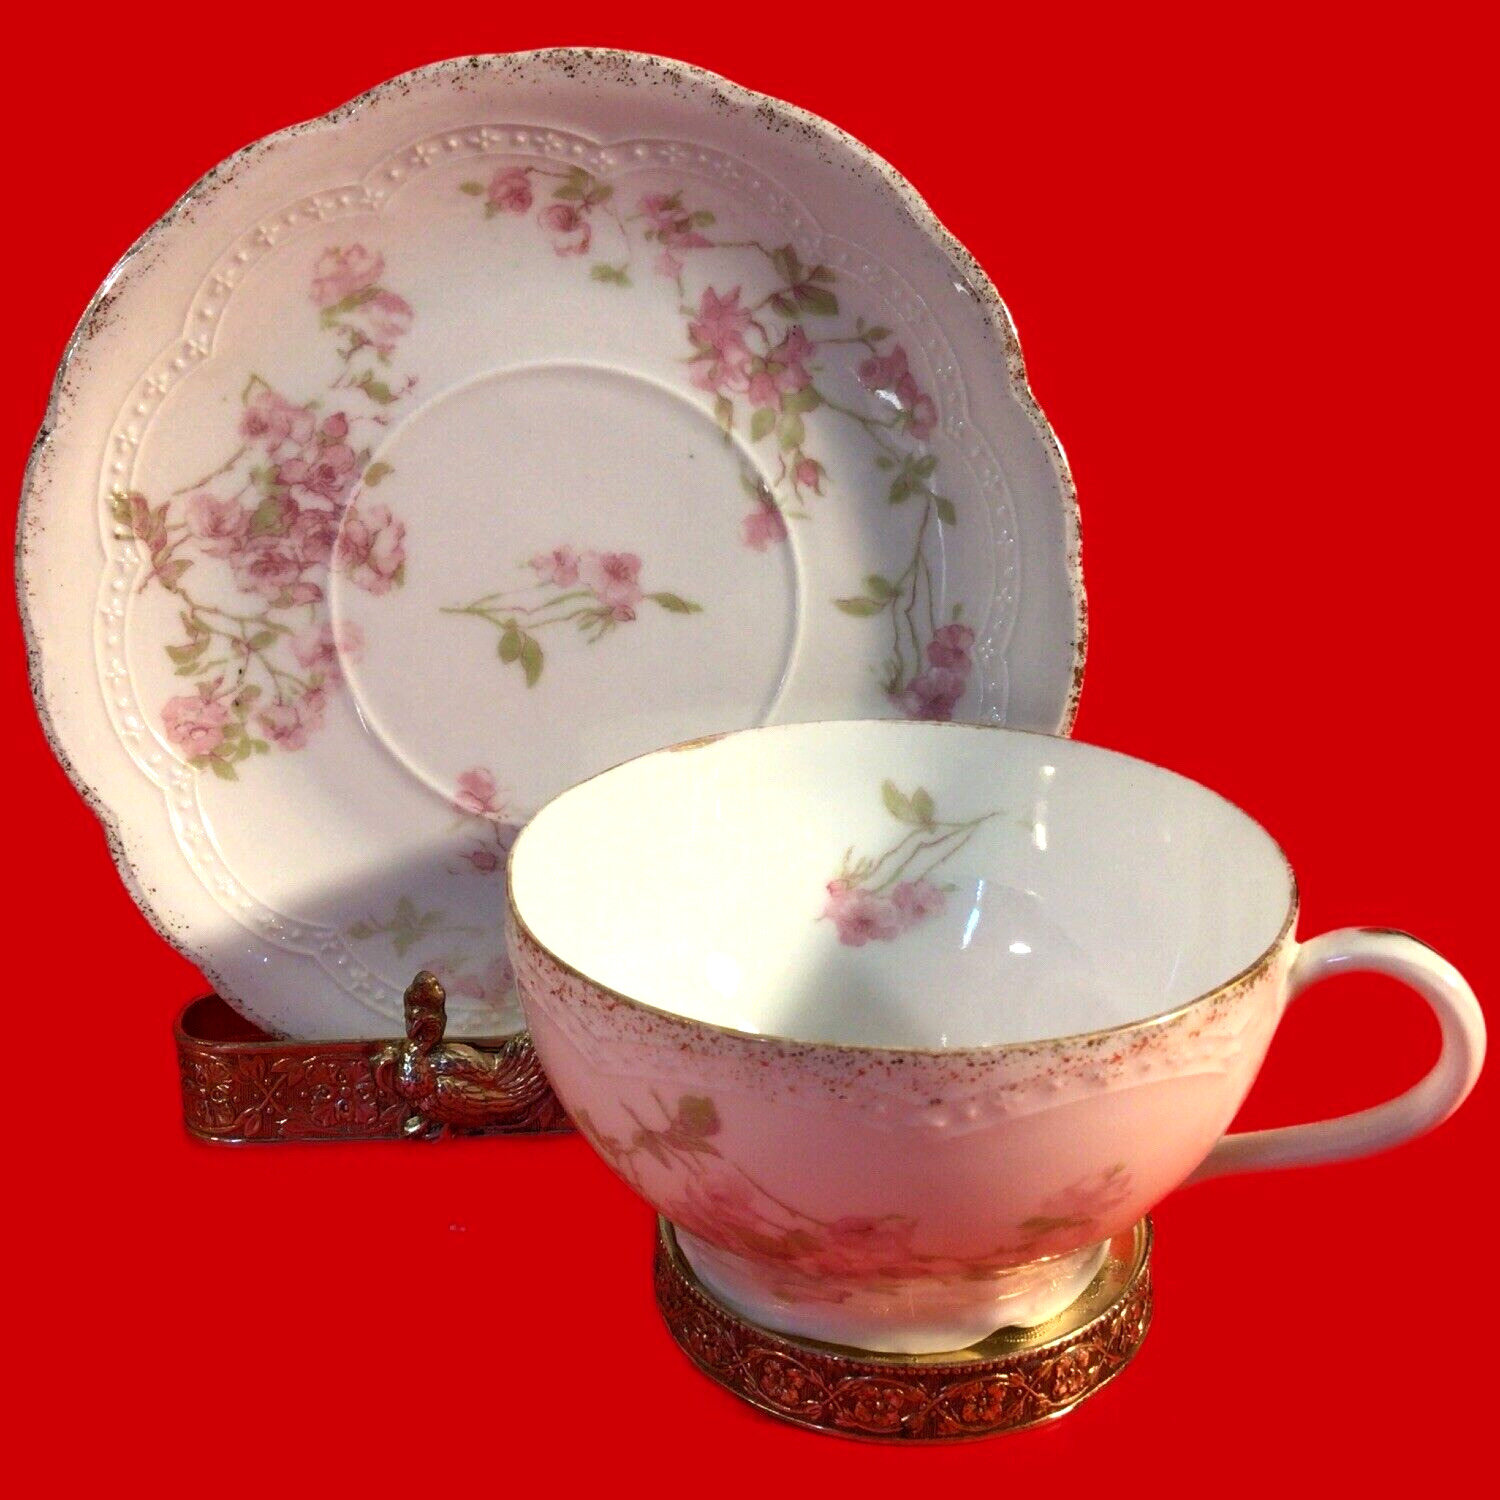 ROSENTHAL CUP AND SAUCER ANTIQUE PINK FLORAL MIRAMARE BAVARIA